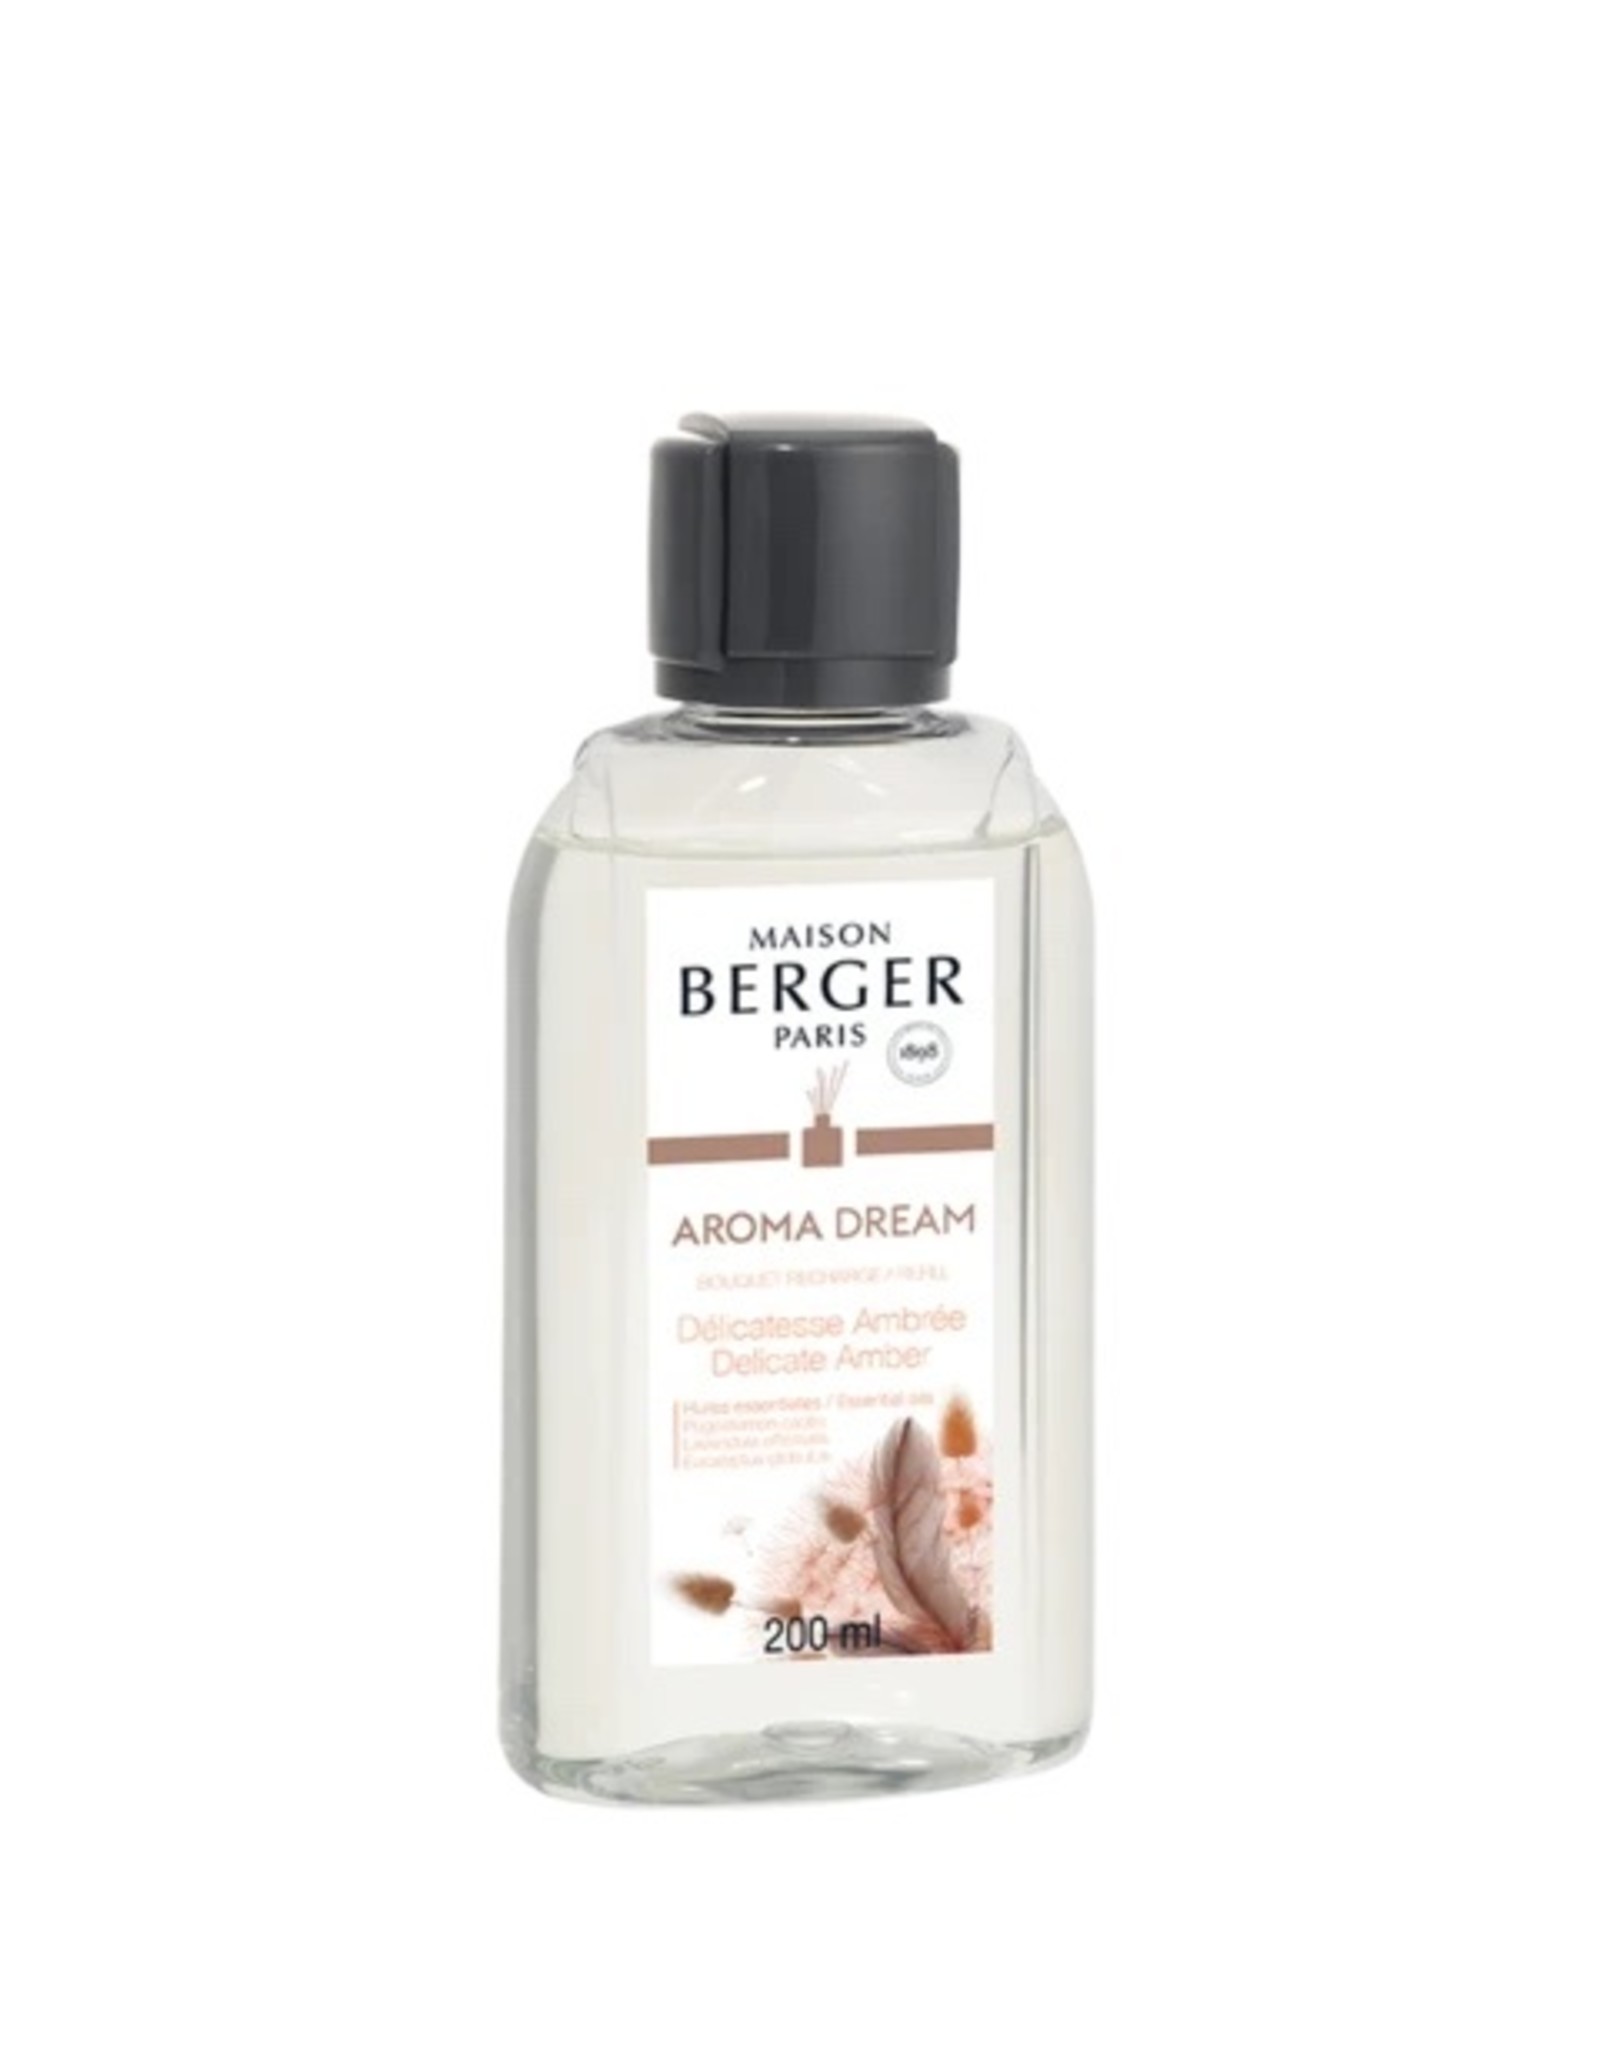 Maison Berger Aroma Dream Reed Diffuser Fragrance 200ml